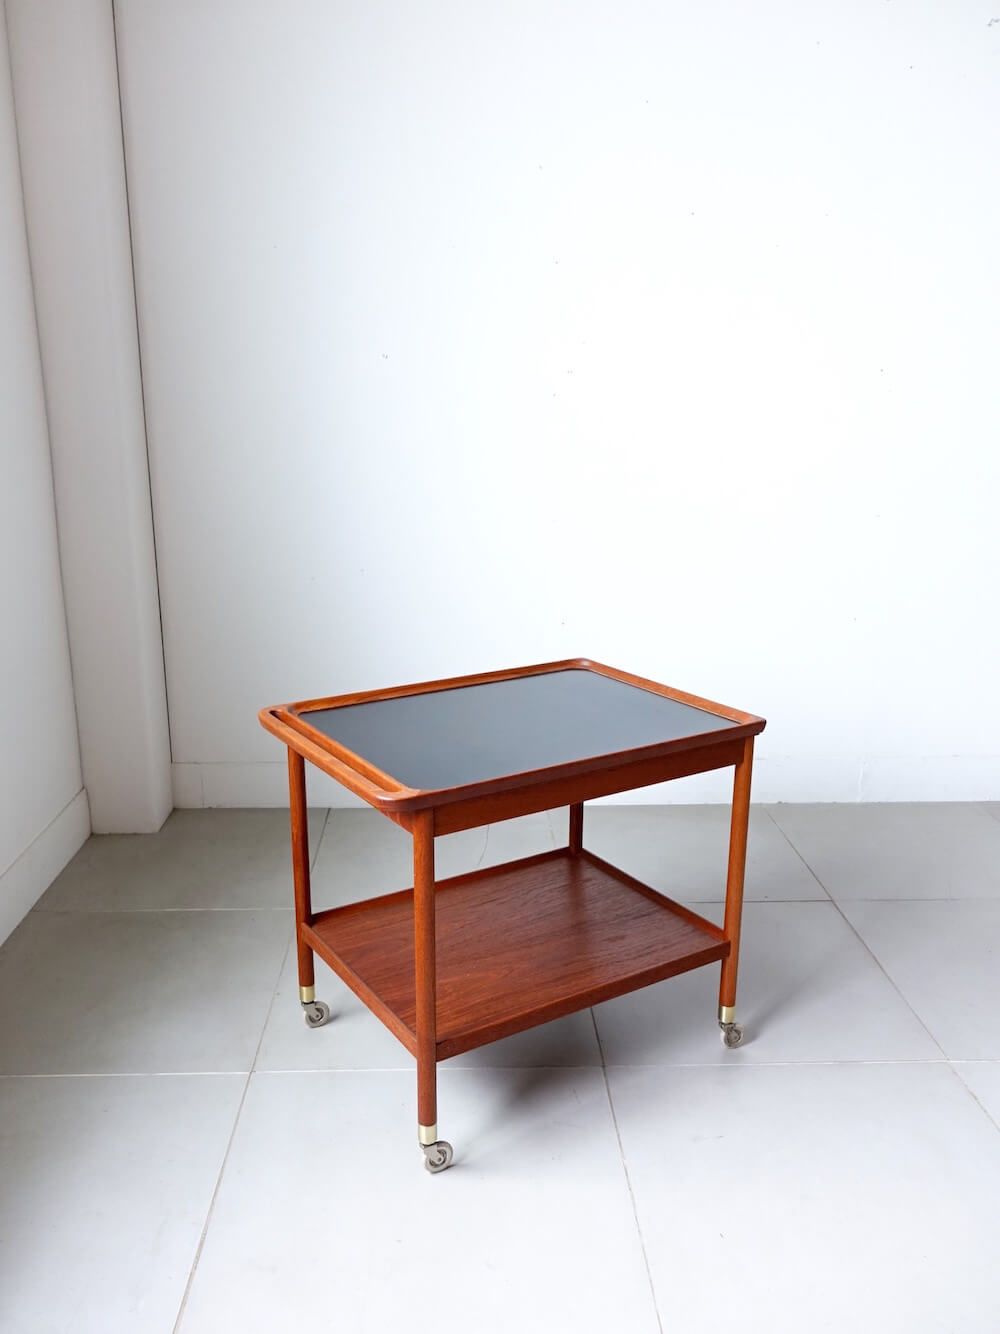 Trolley table by Ludvig Pontoppidan